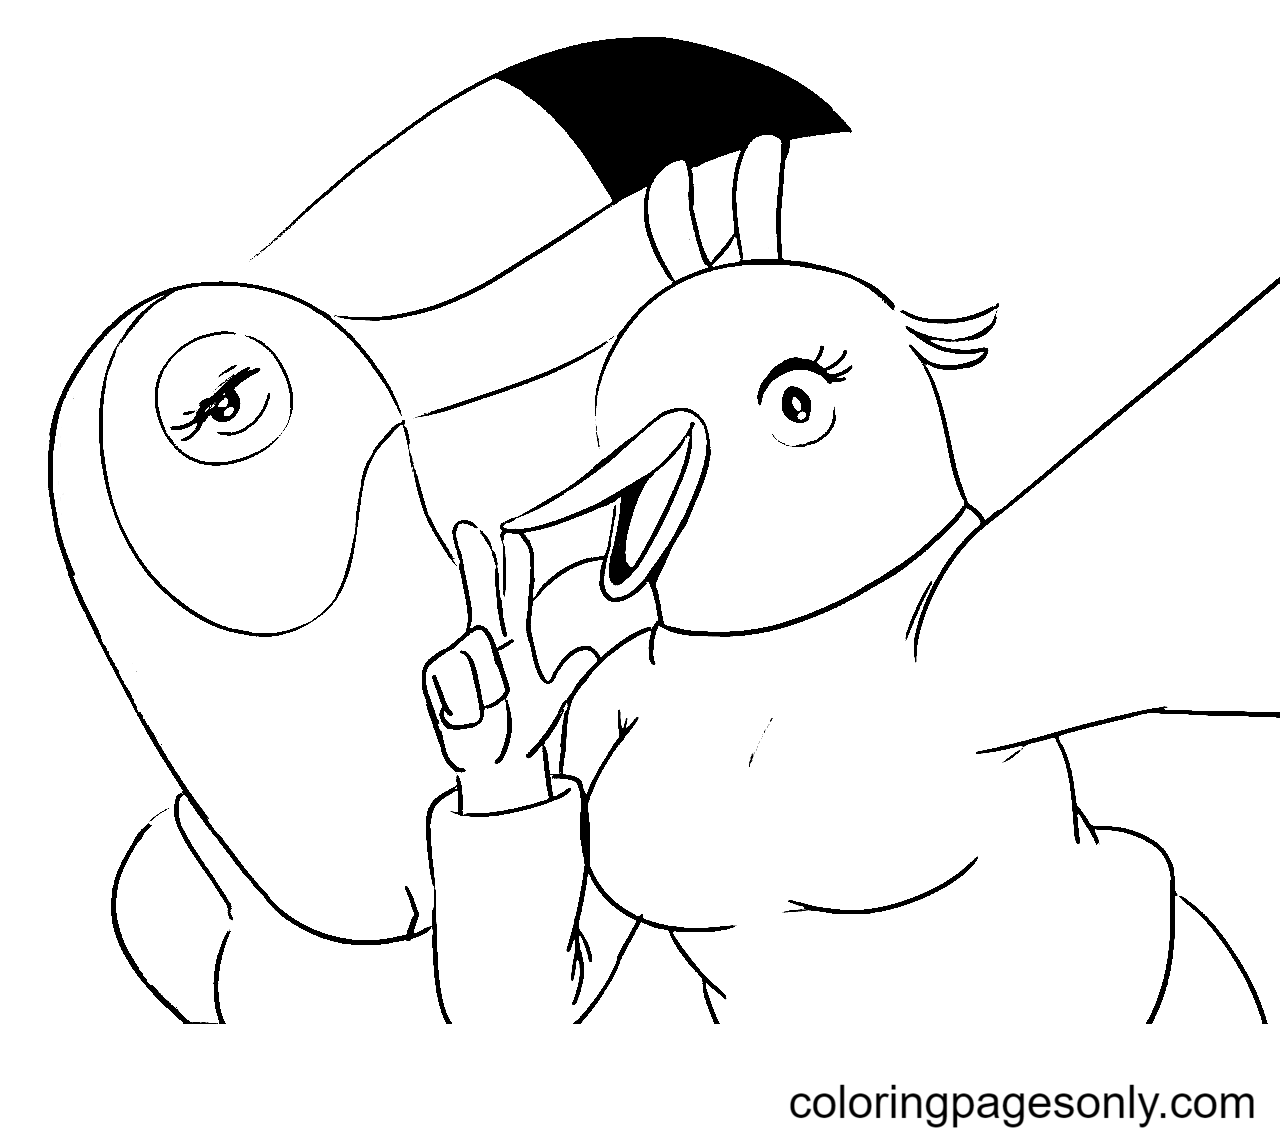 Tuca and Bertie Posing Coloring Page